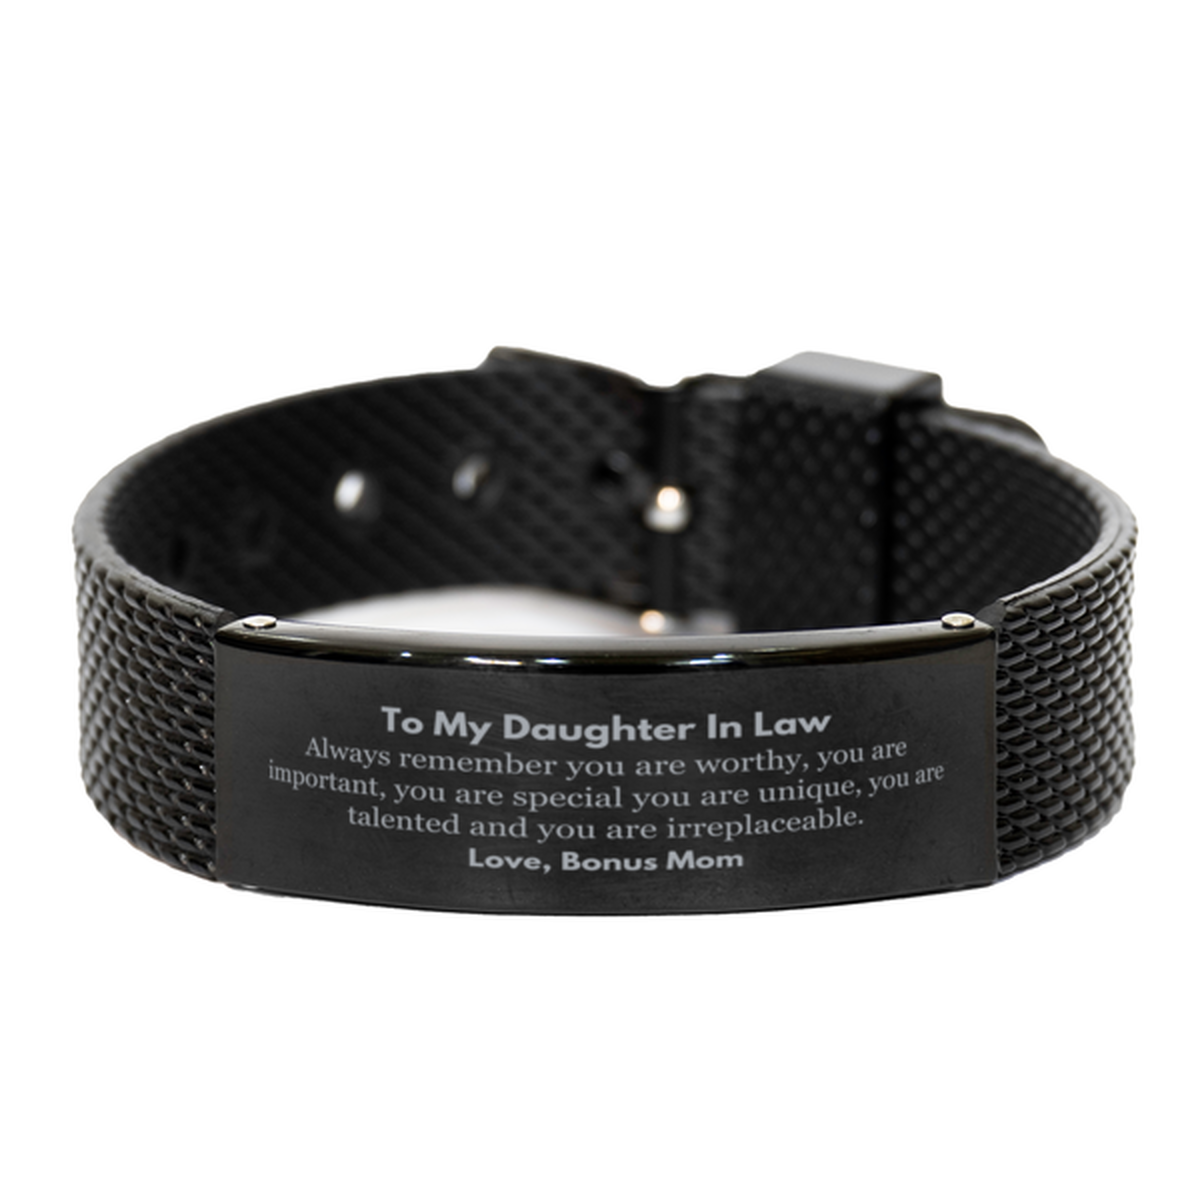 Daughter In Law Birthday Gifts from Bonus Mom, Inspirational Black Shark Mesh Bracelet for Daughter In Law Christmas Graduation Gifts for Daughter In Law Always remember you are worthy, you are important. Love, Bonus Mom